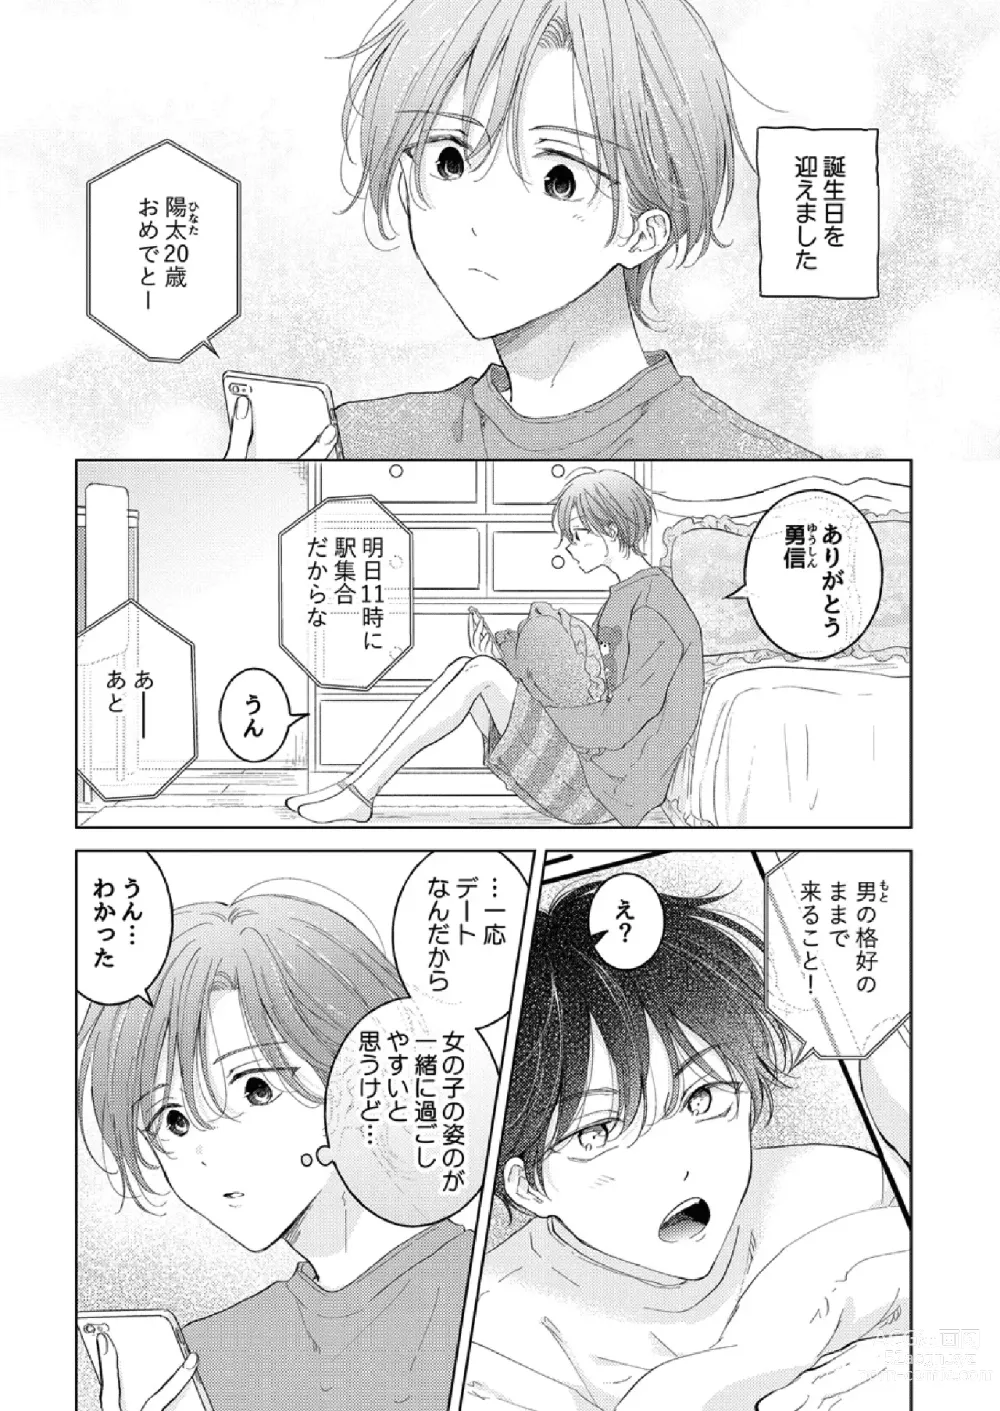 Page 3 of doujinshi How to use Gender-Changing Apps Properly 2